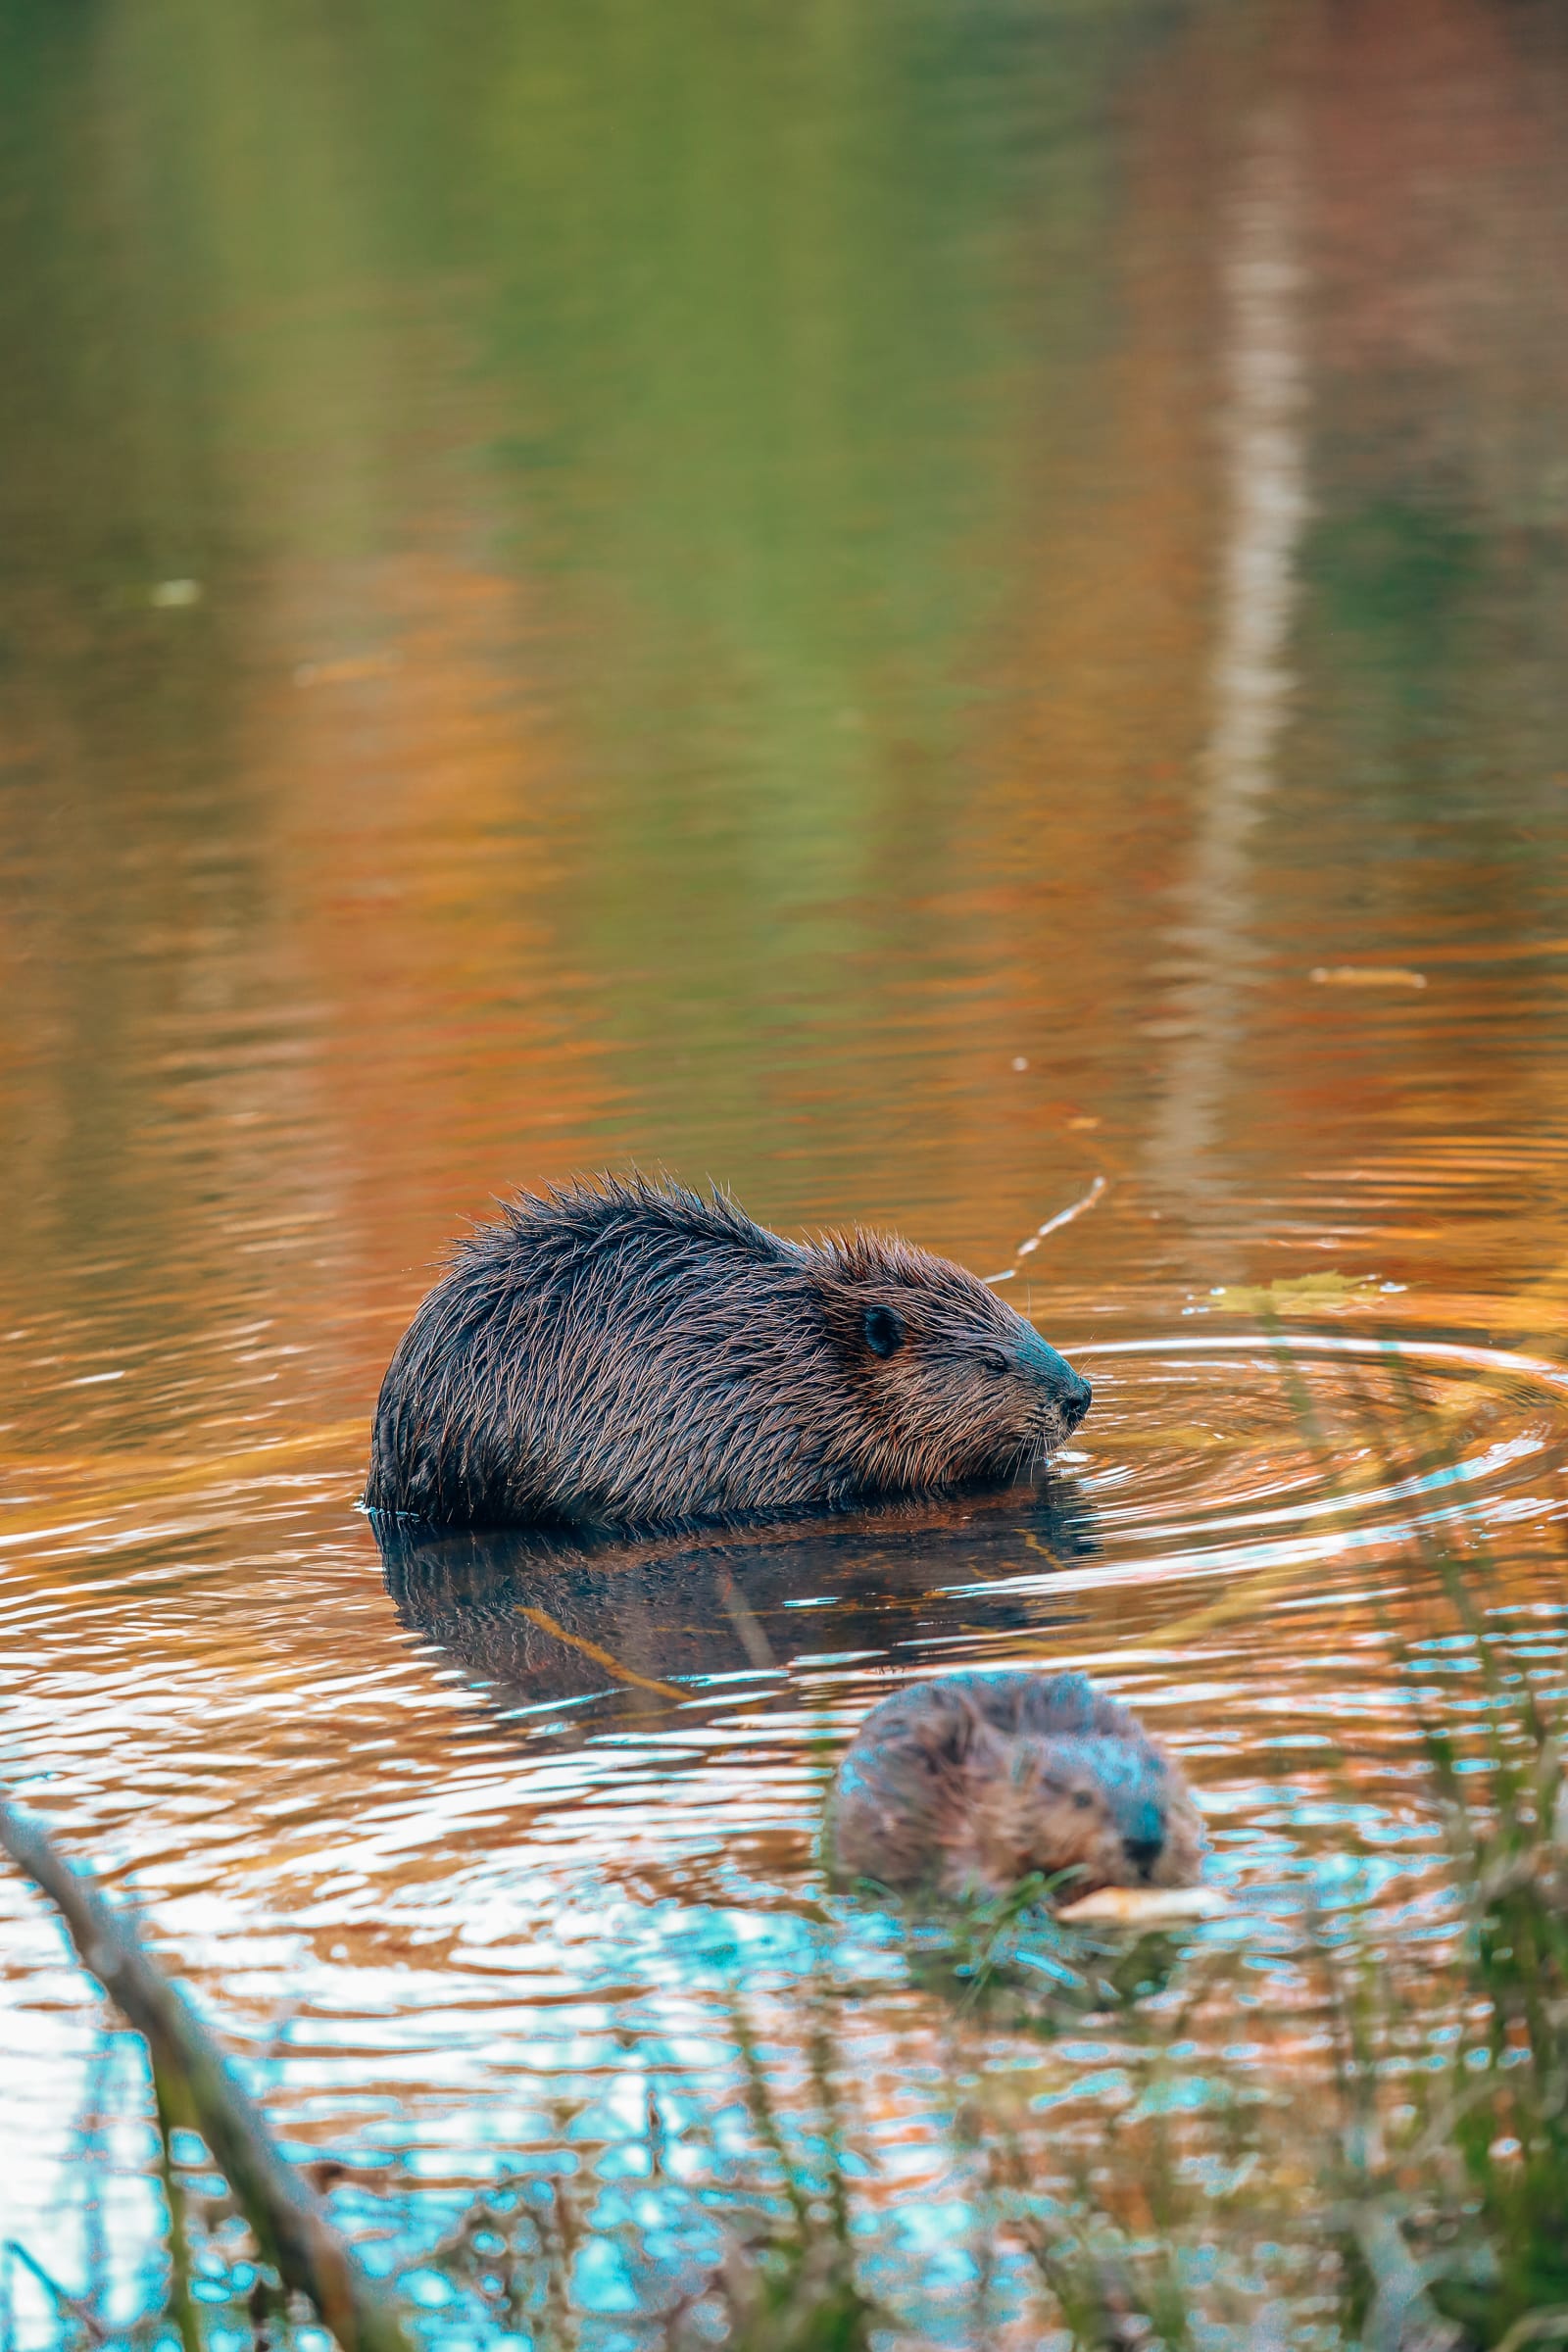 Getting Lost In Nature (And With Beavers) In Quebec, Canada (12)